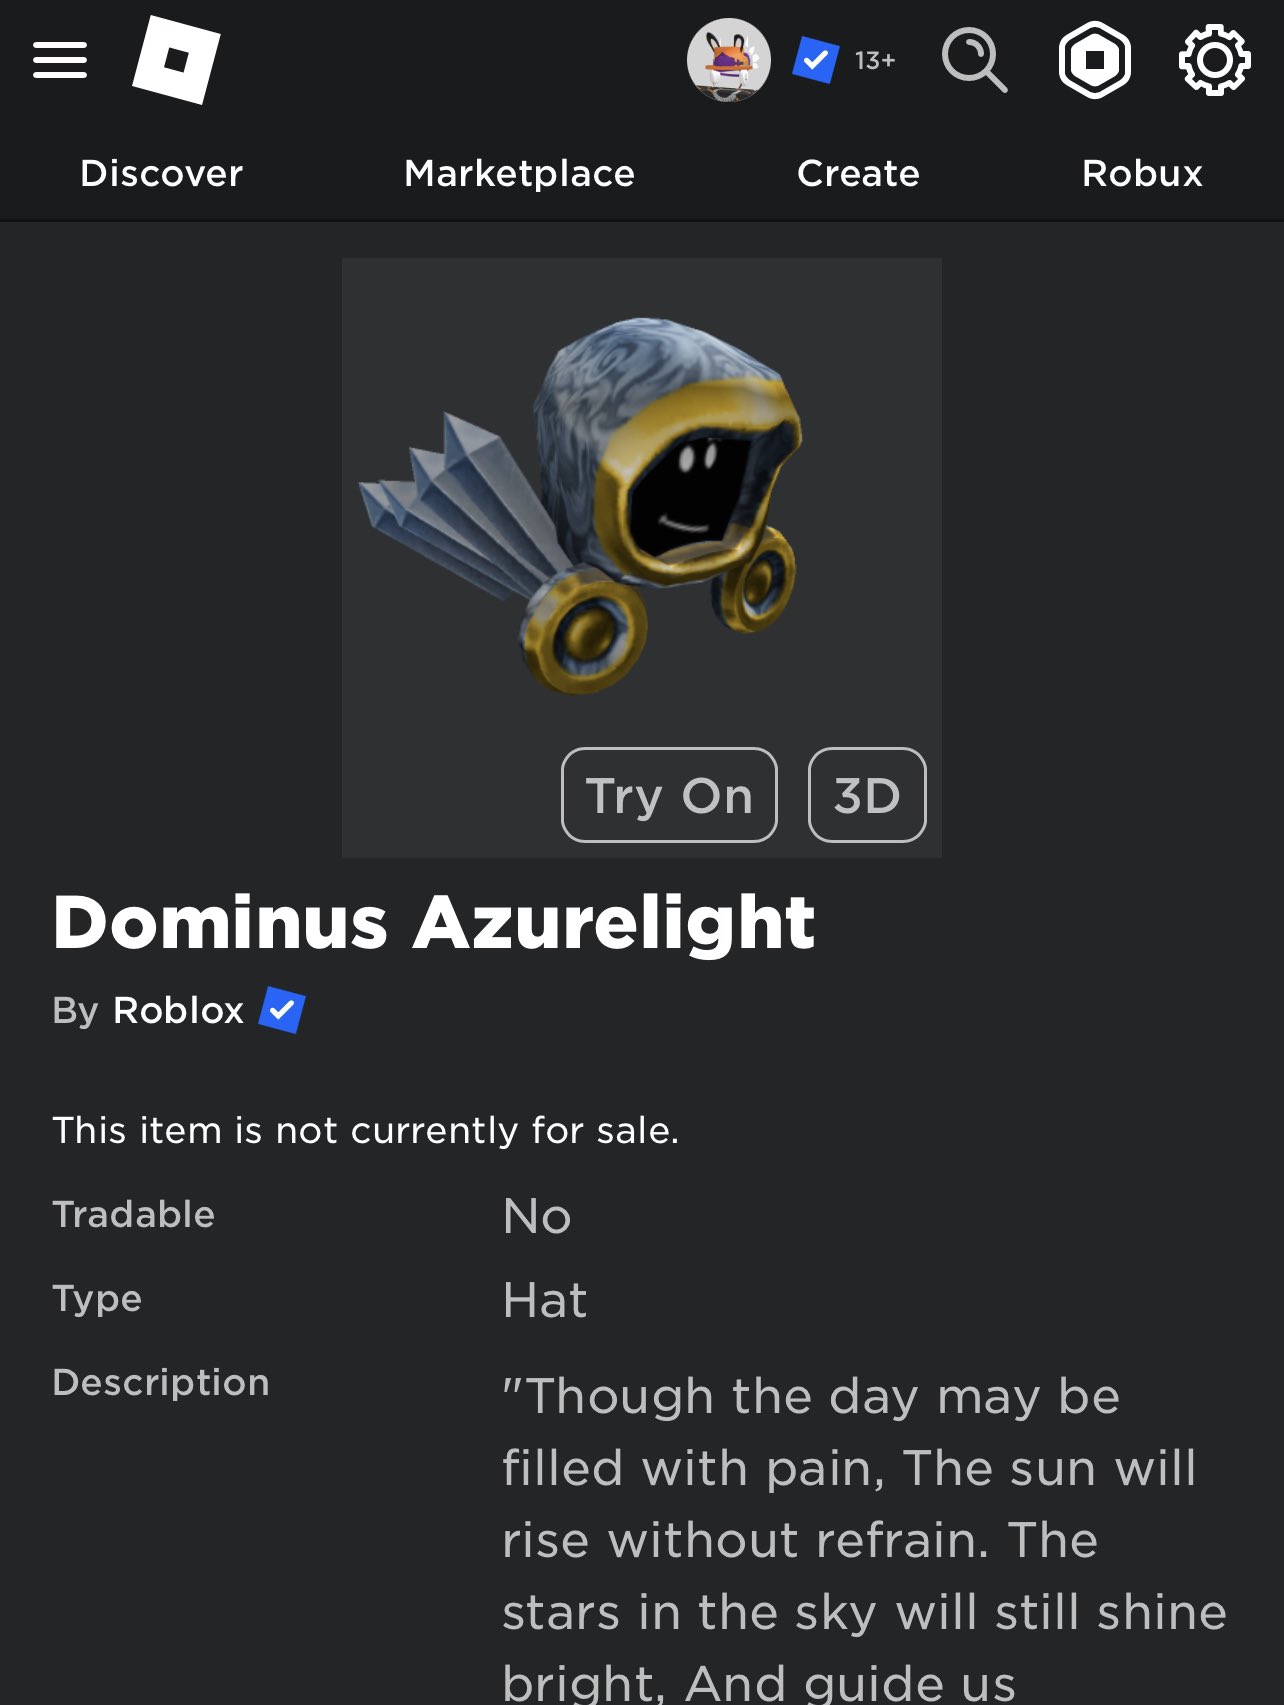 How to create a Dominus in Roblox and let people buy it for a